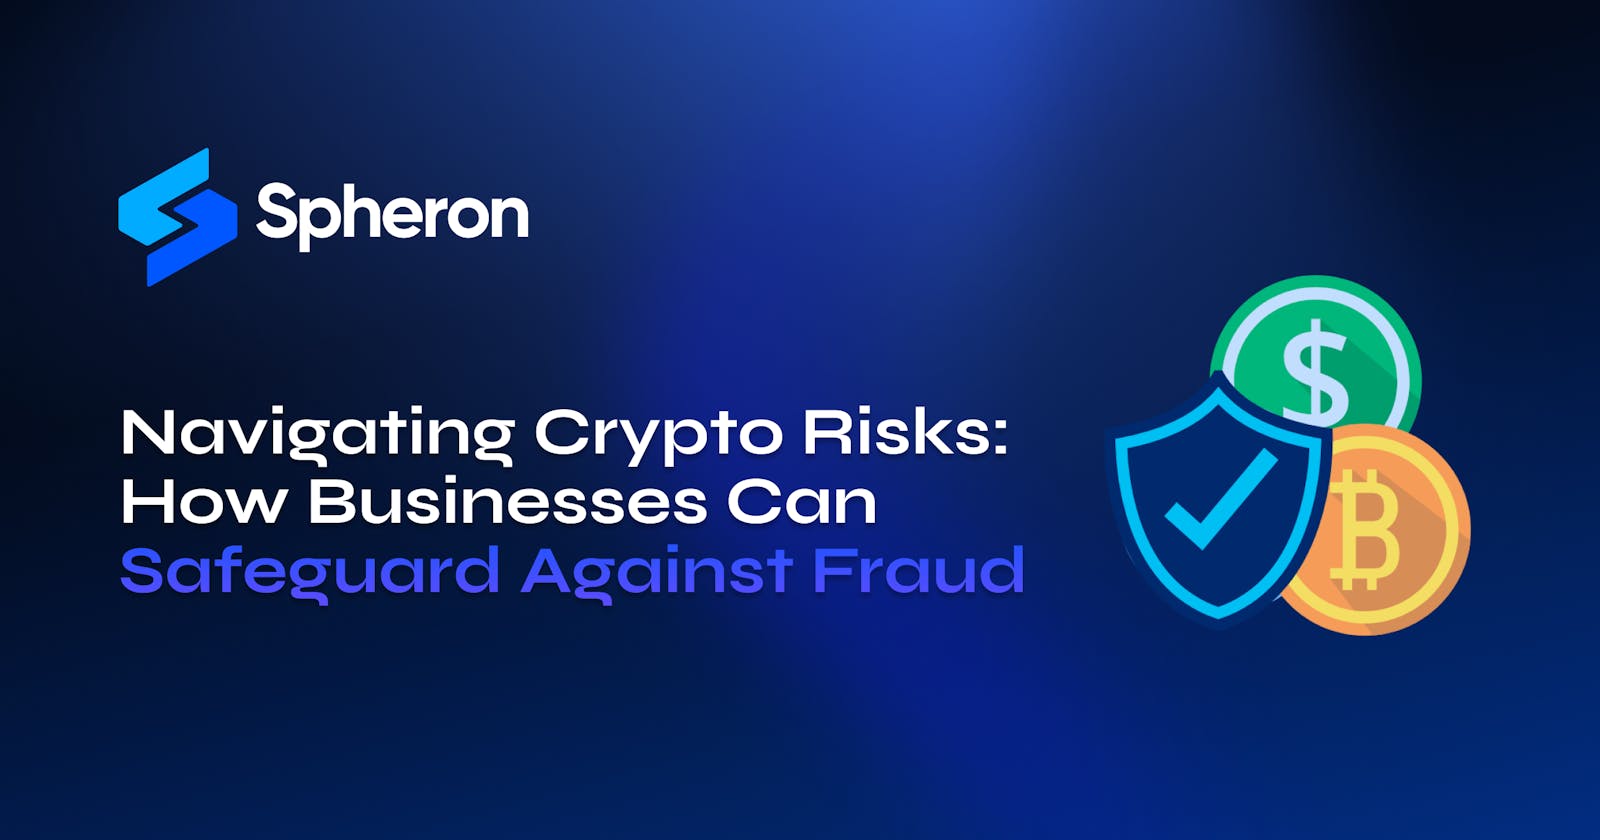 Navigating Cryptocurrency Risks: How Businesses Can Safeguard Against Fraud